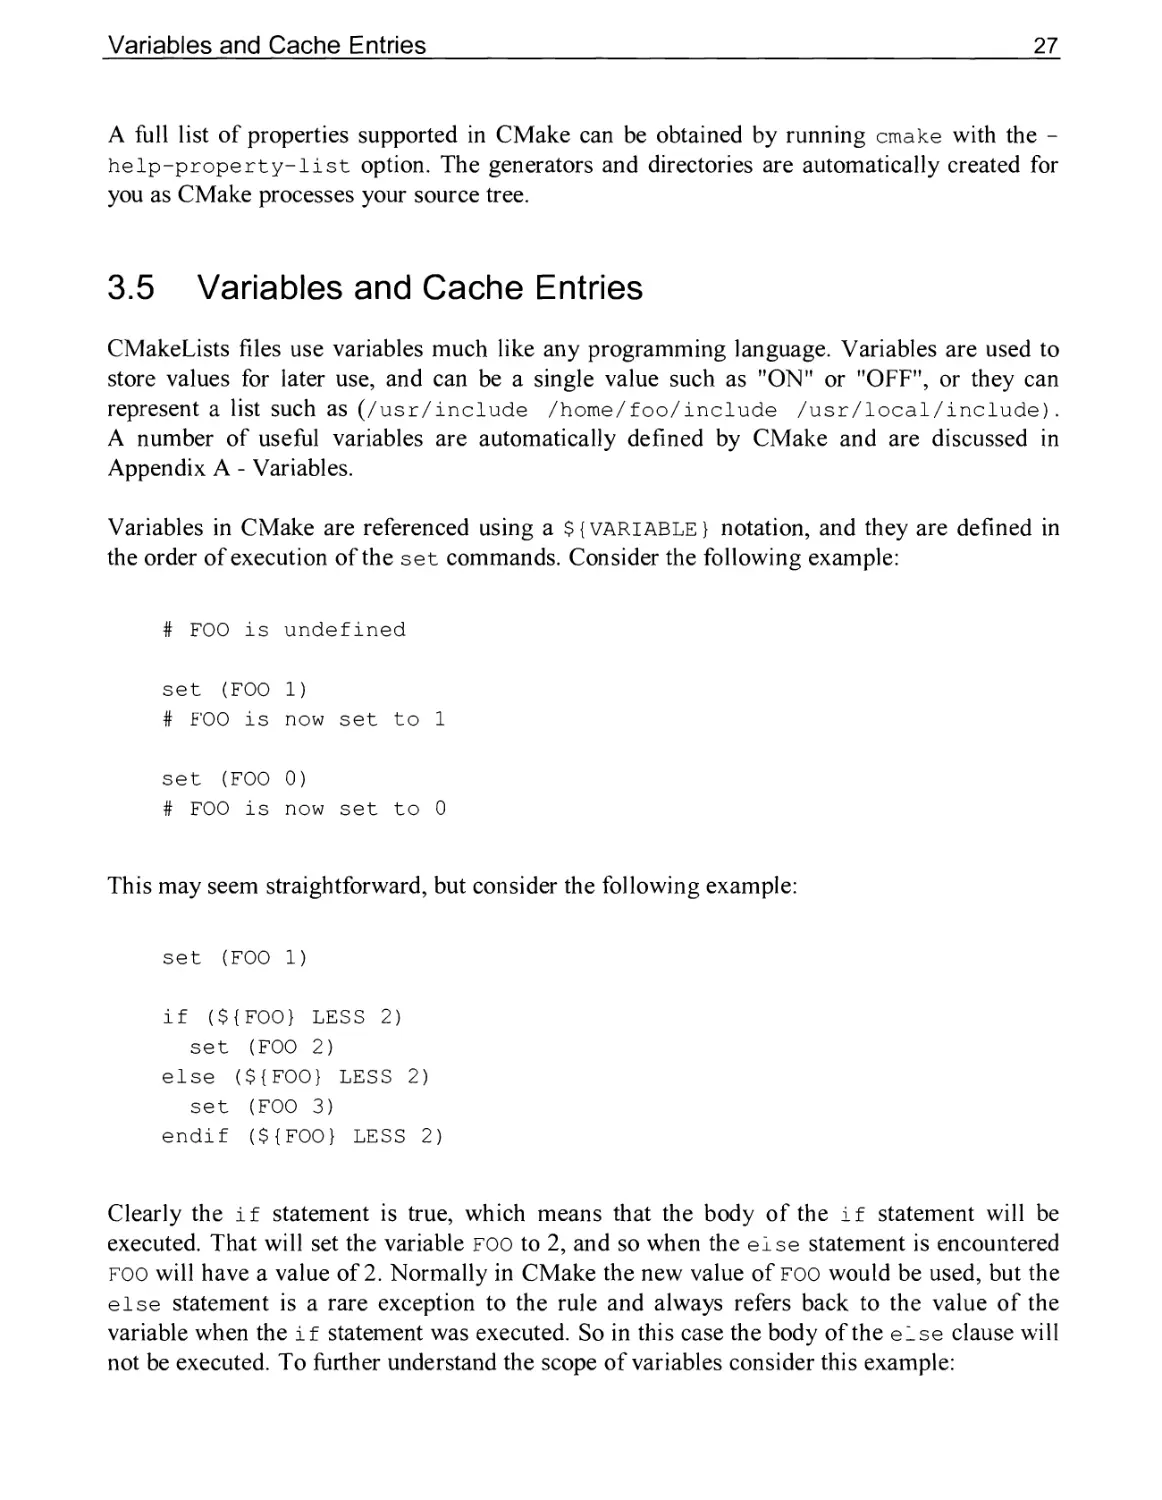 3.5 Variables and Cache Entries